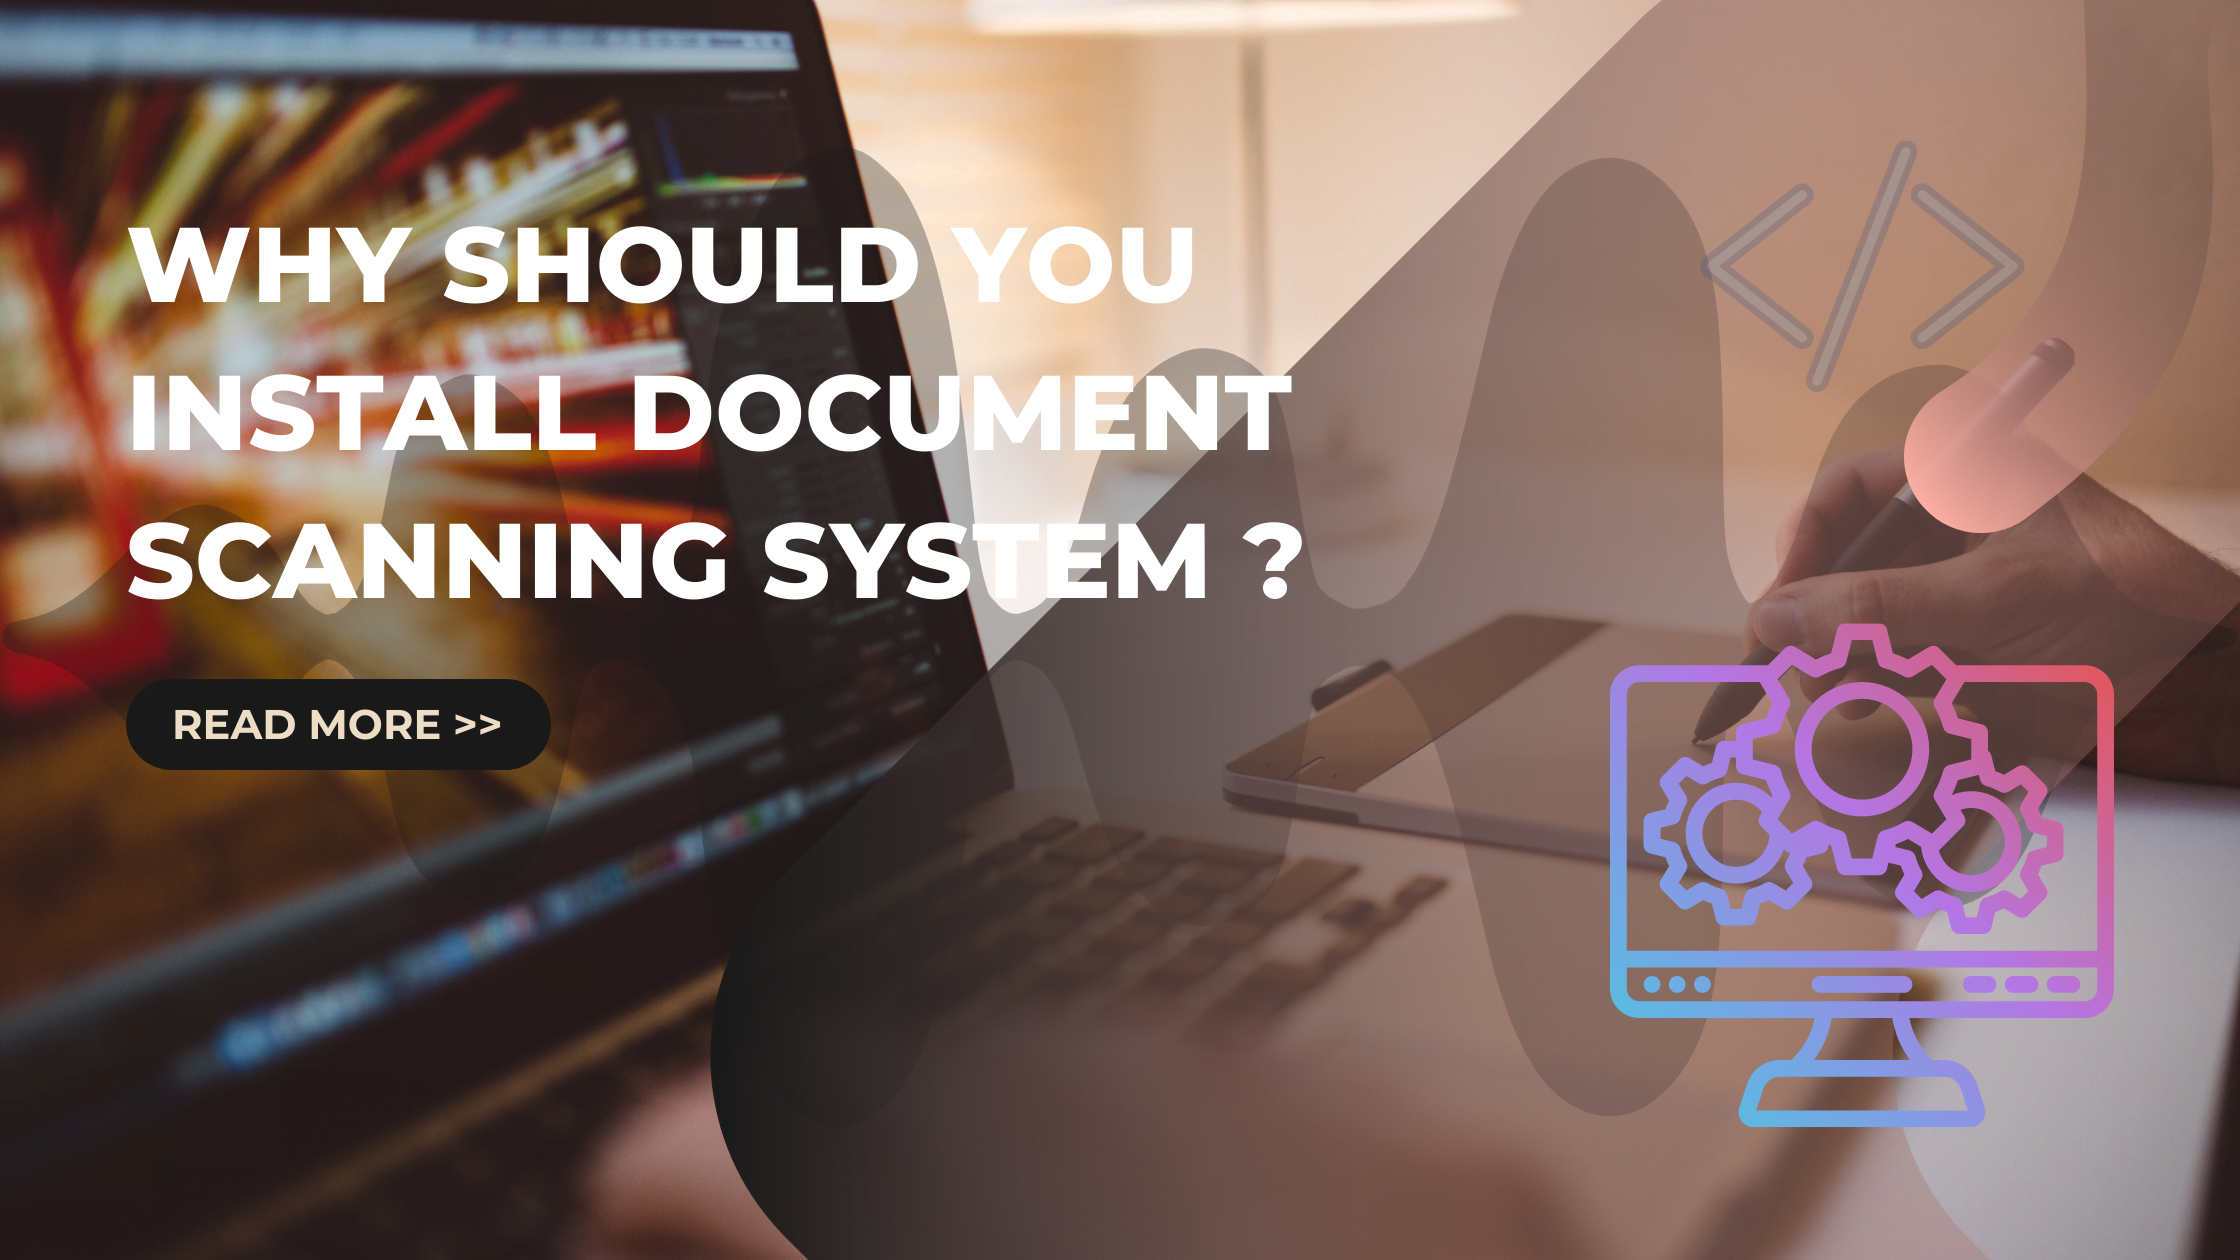 Why Should You Install Document Scanning System